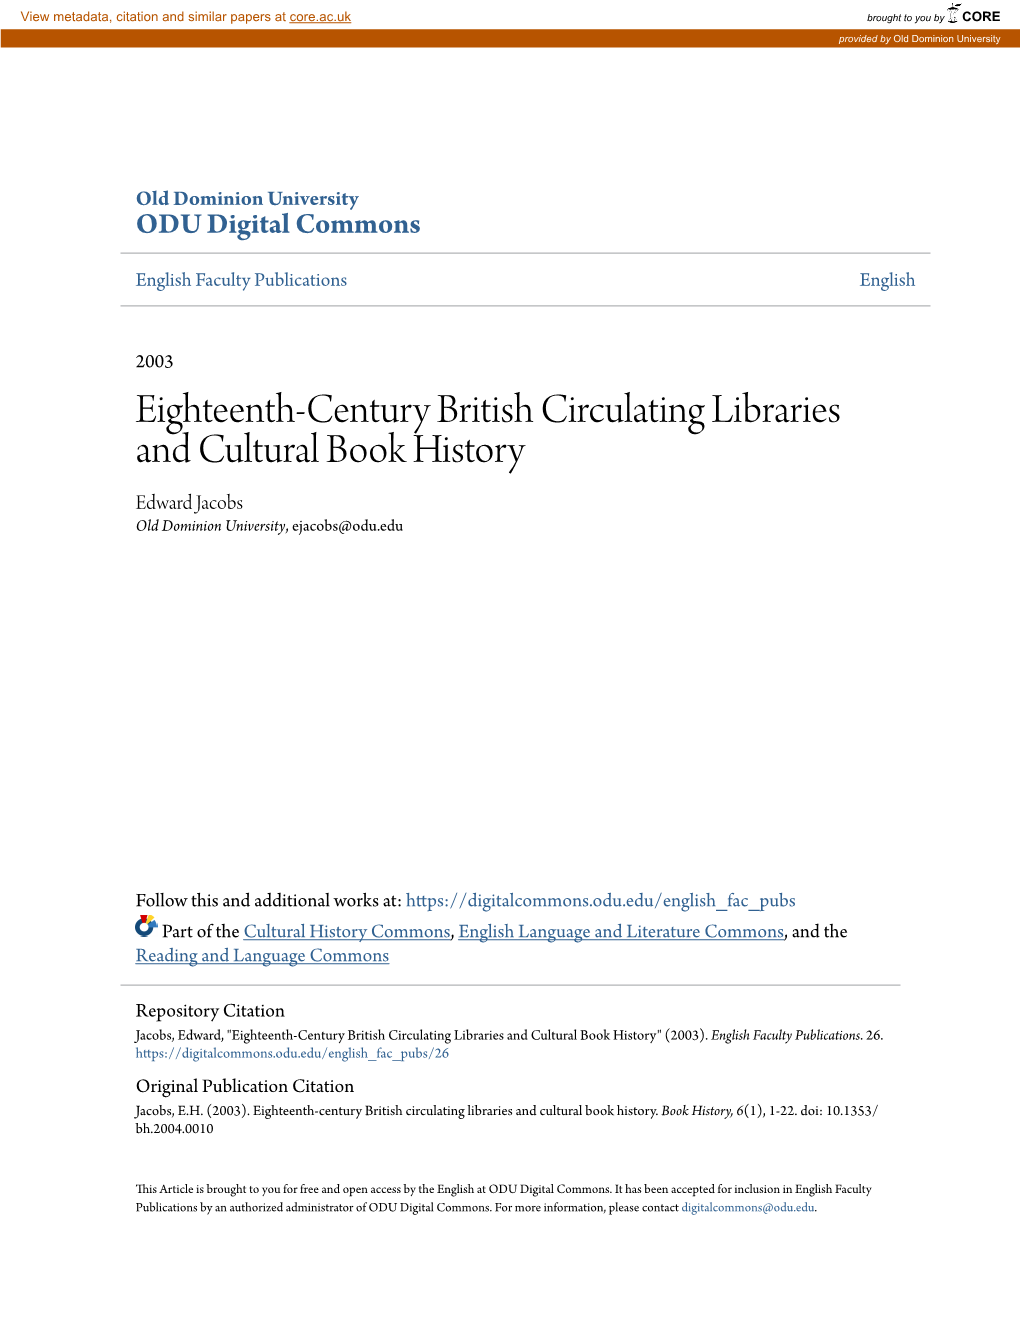 Eighteenth-Century British Circulating Libraries and Cultural Book History Edward Jacobs Old Dominion University, Ejacobs@Odu.Edu